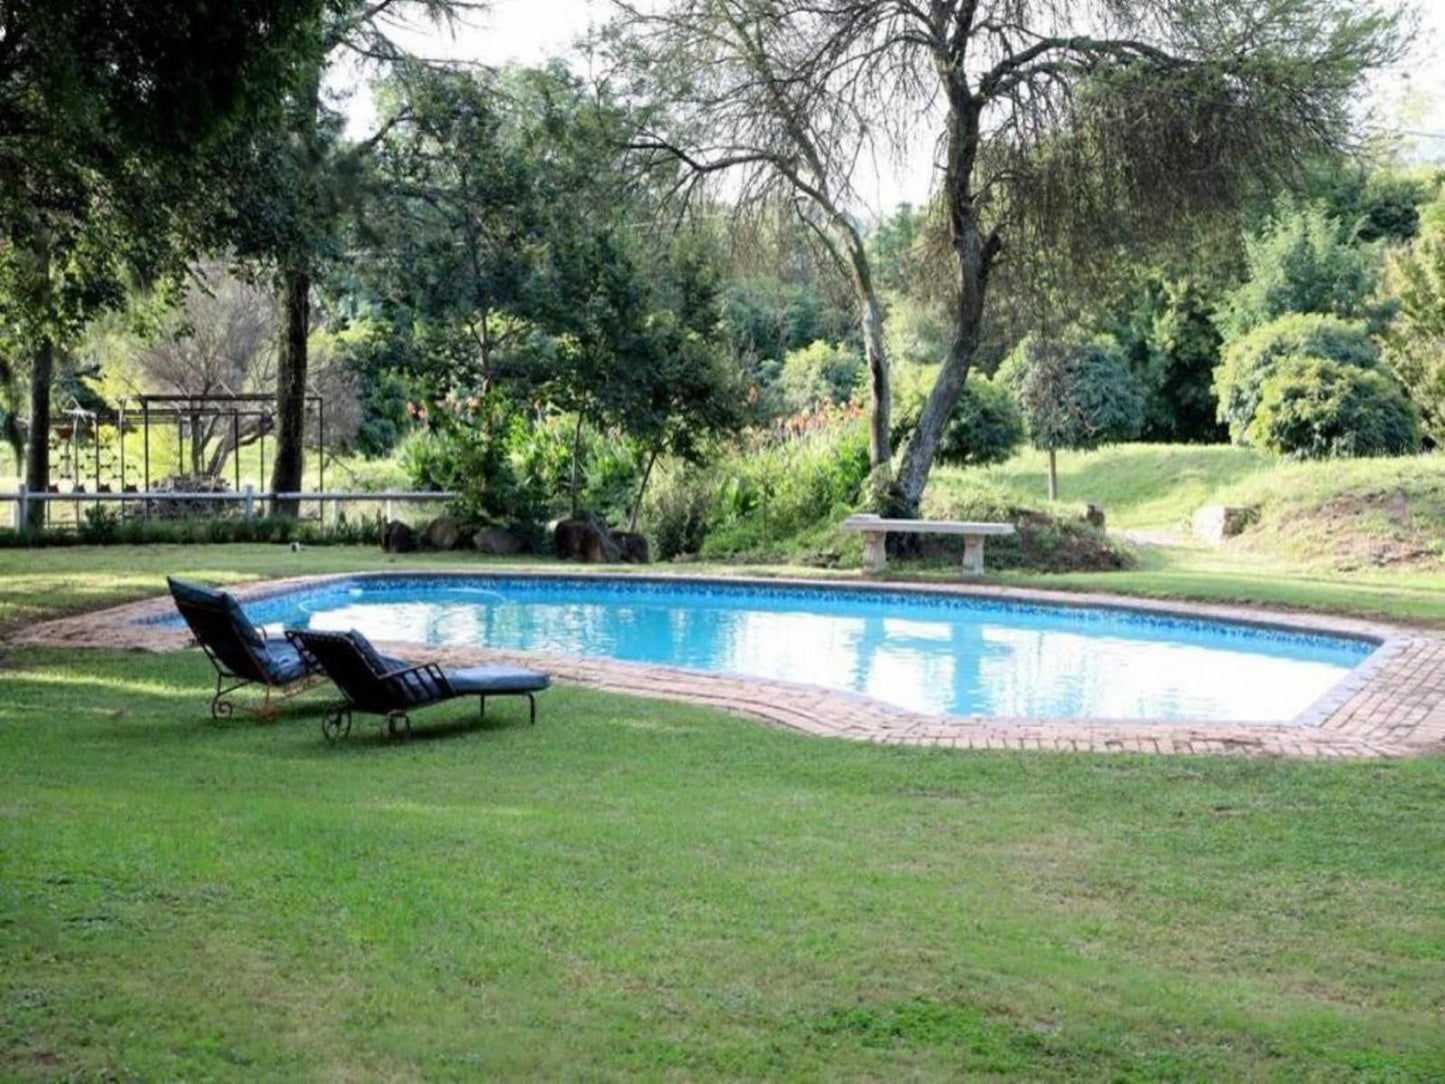 The River Cottage And Mainhouse At Woodlands Muldersdrift Gauteng South Africa Garden, Nature, Plant, Swimming Pool